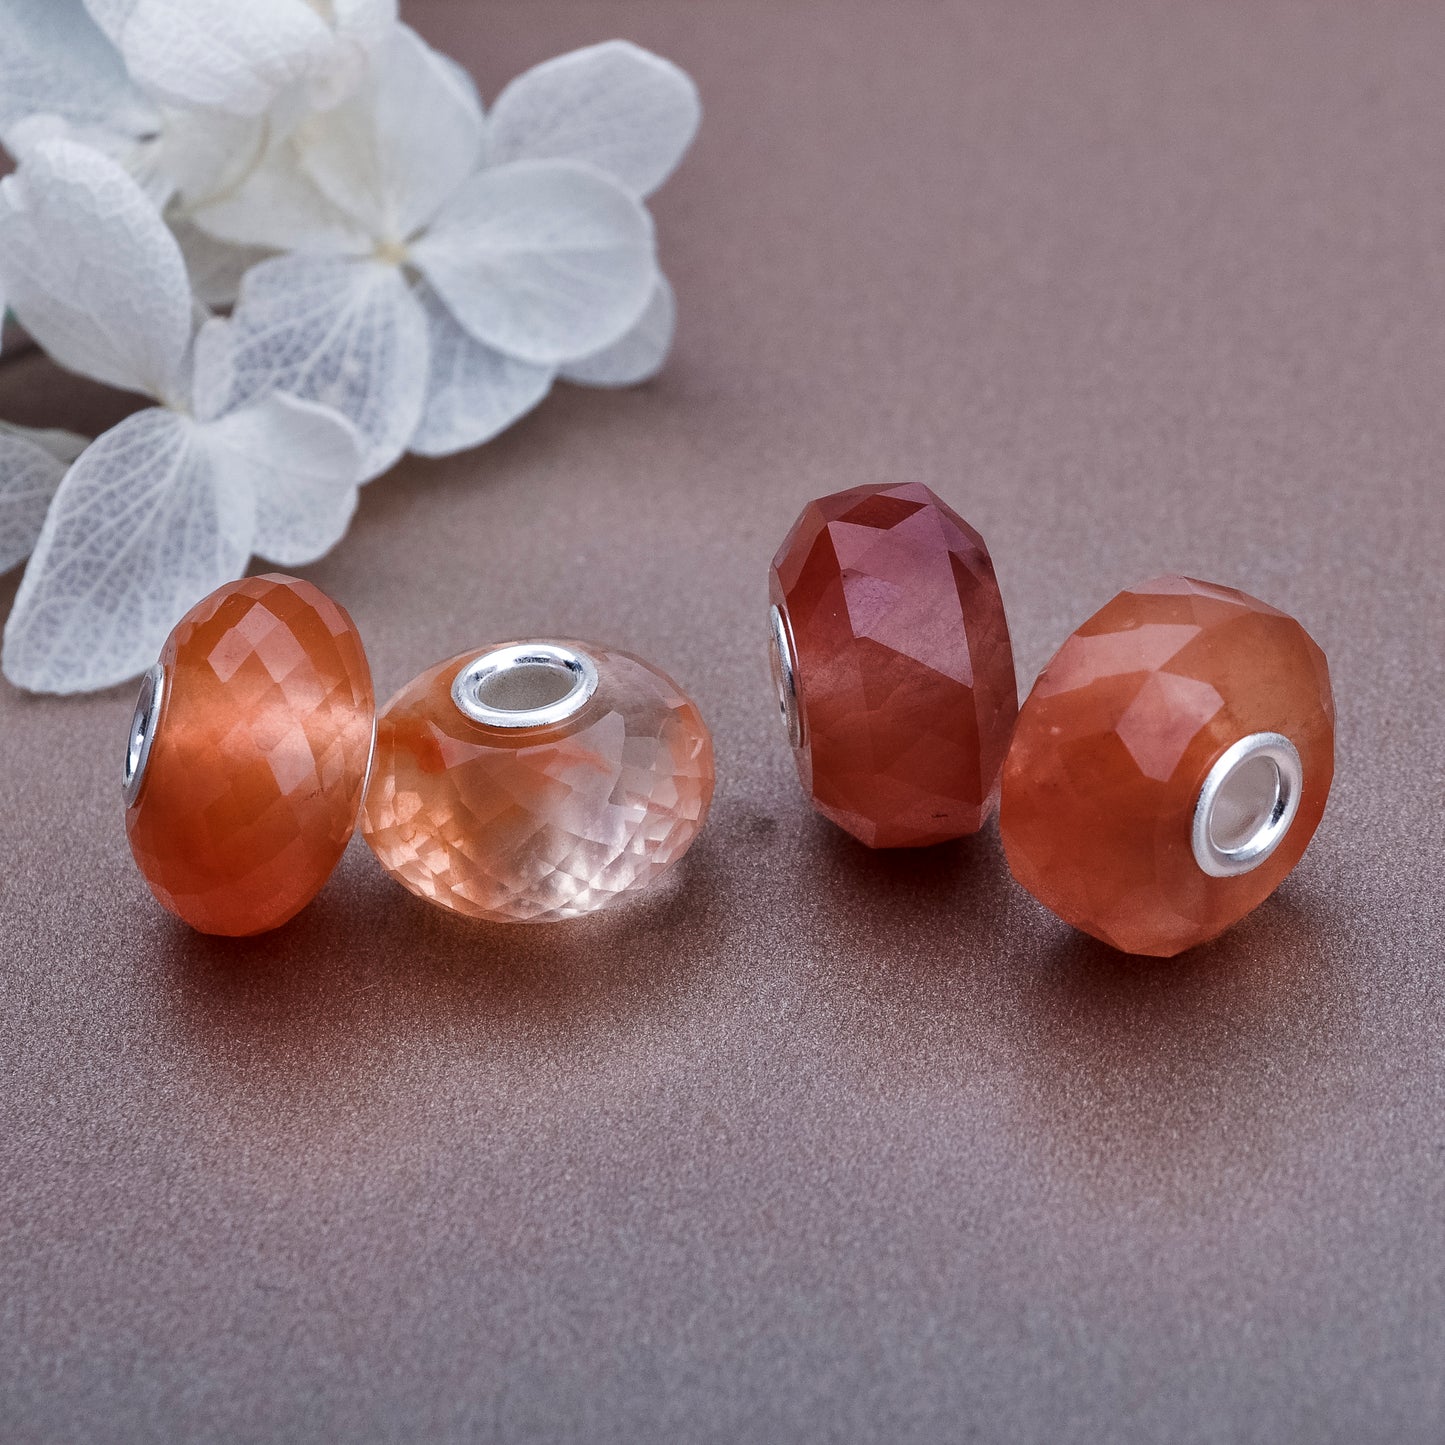 Faceted Awesome Red Rutilite Quartz Bead